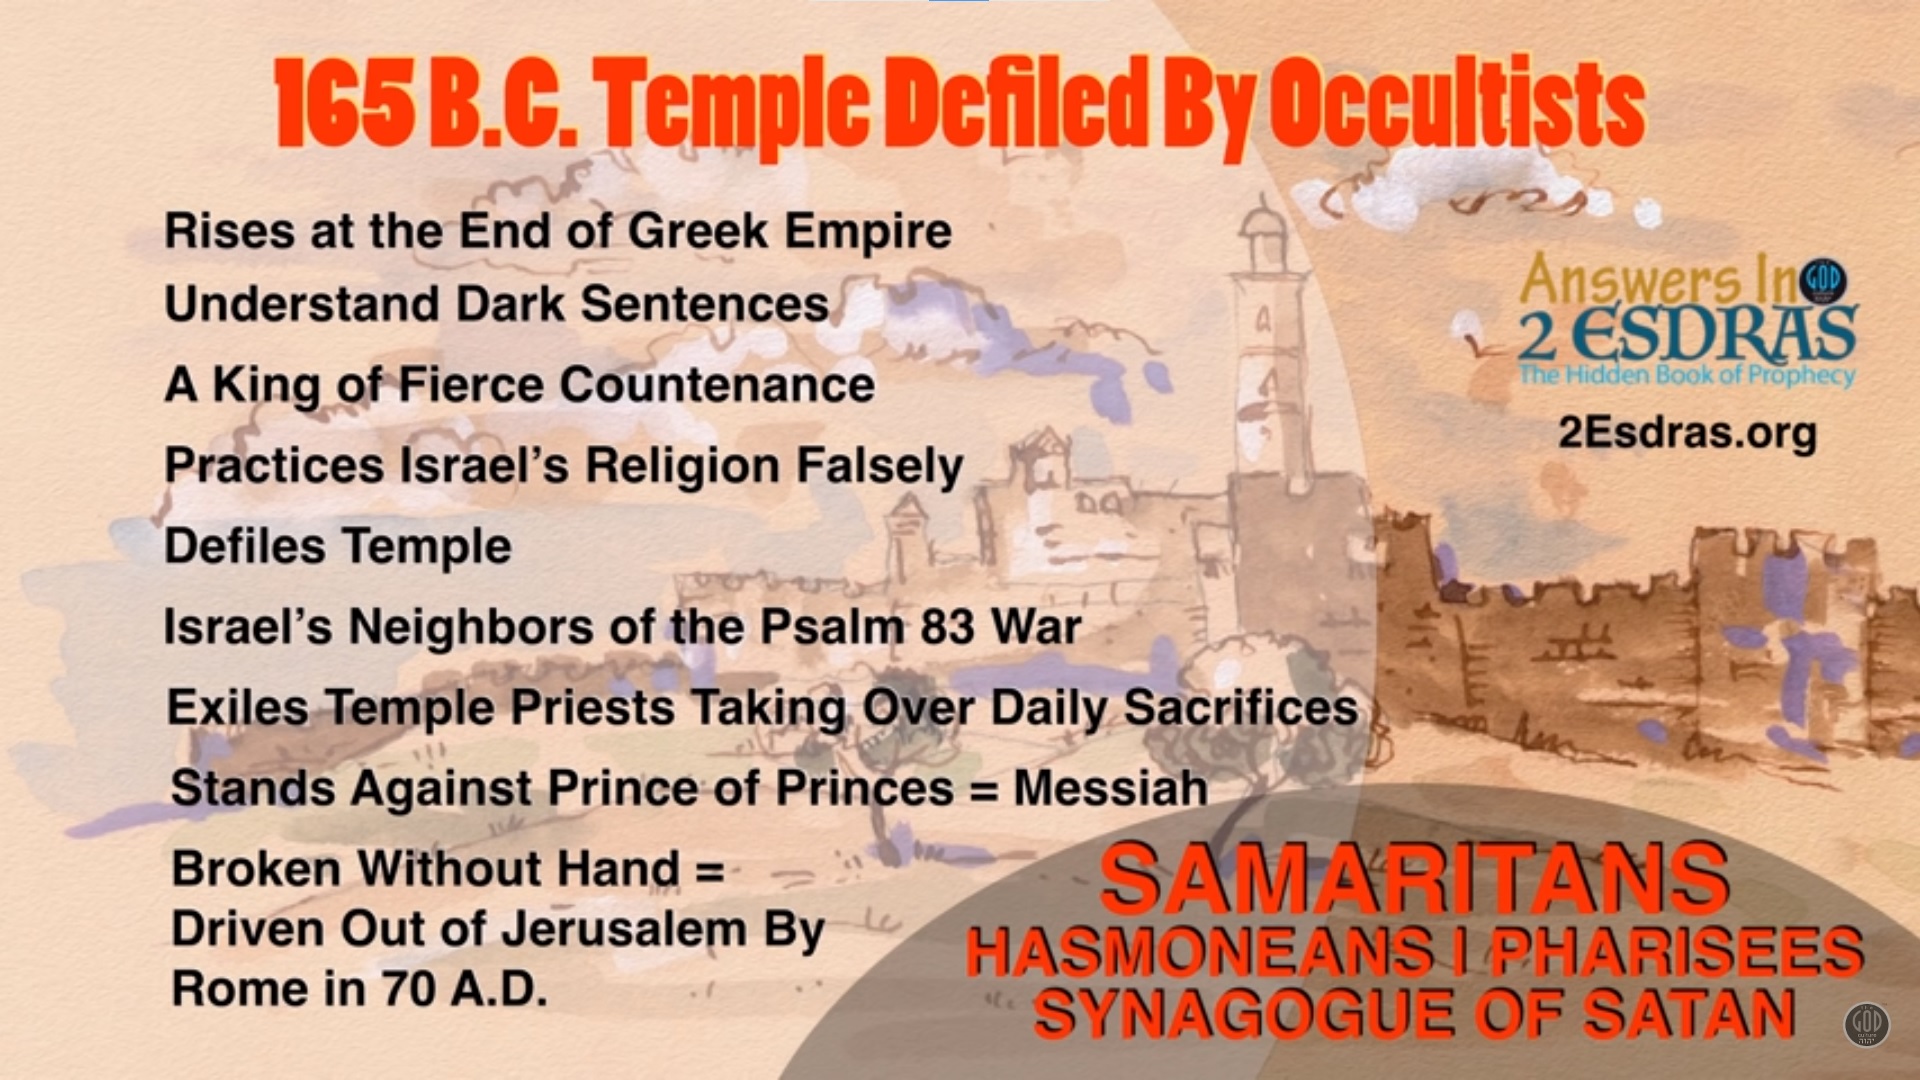 Jews Defiled The Temple